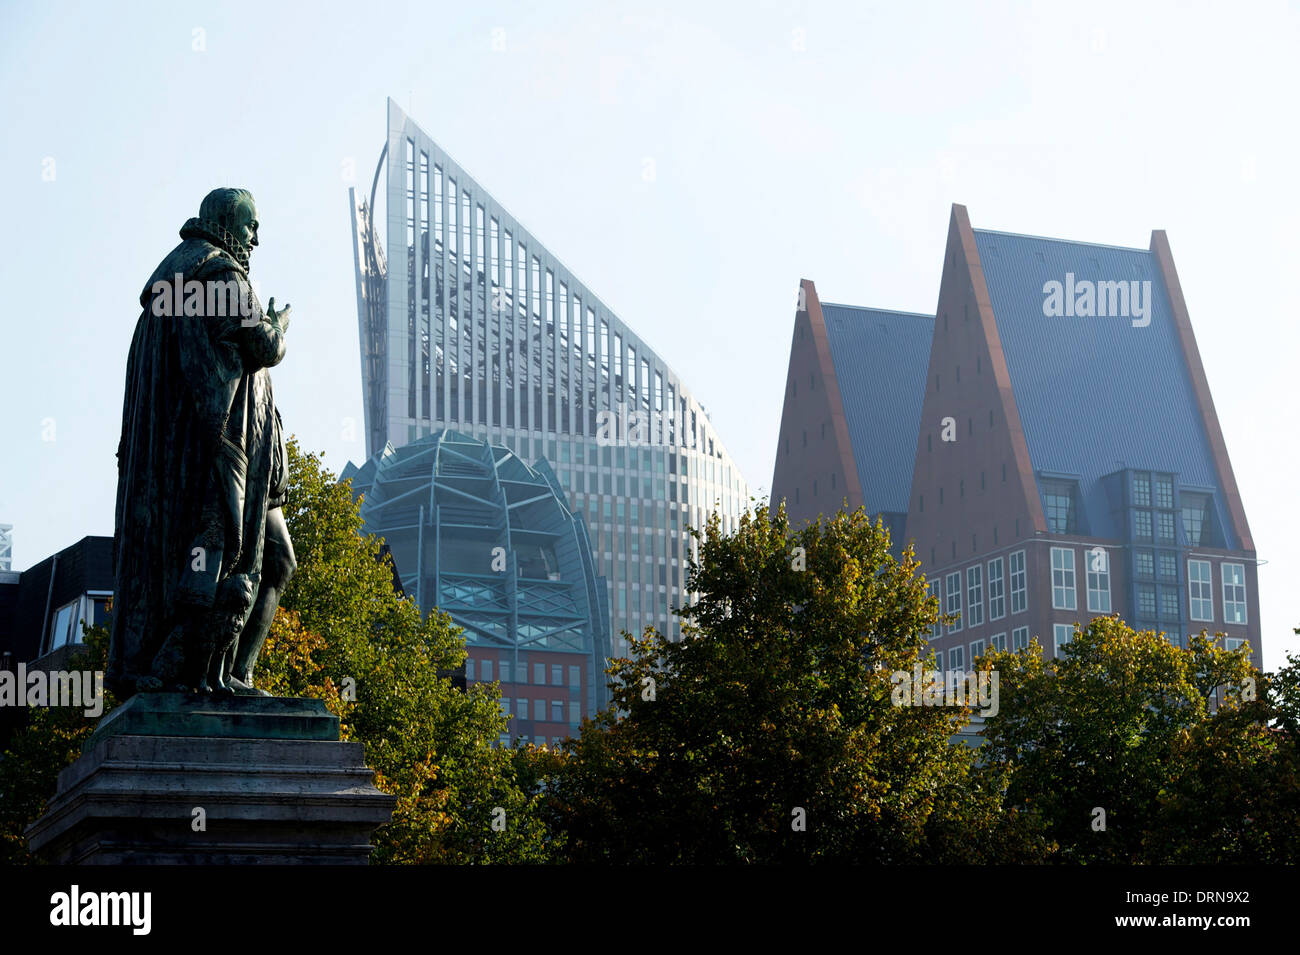 Den Haag. 07-10-2013. Cityscape as seen from 'Plein' with staue of Willem of Orange and government buildings. Stock Photo